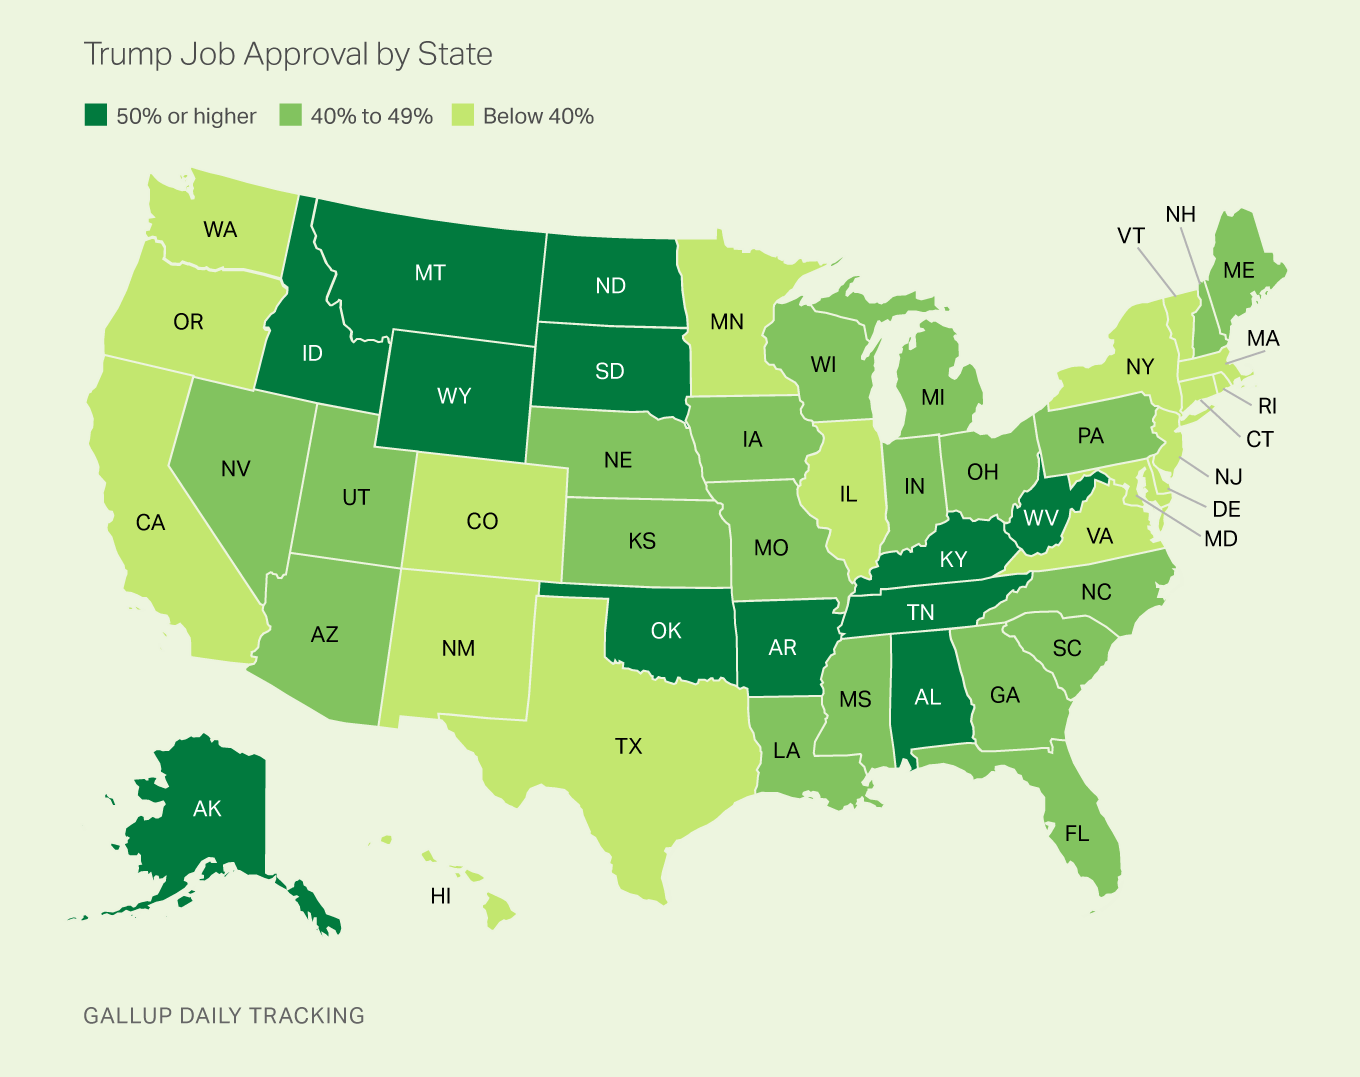 Trump Job Approval by State